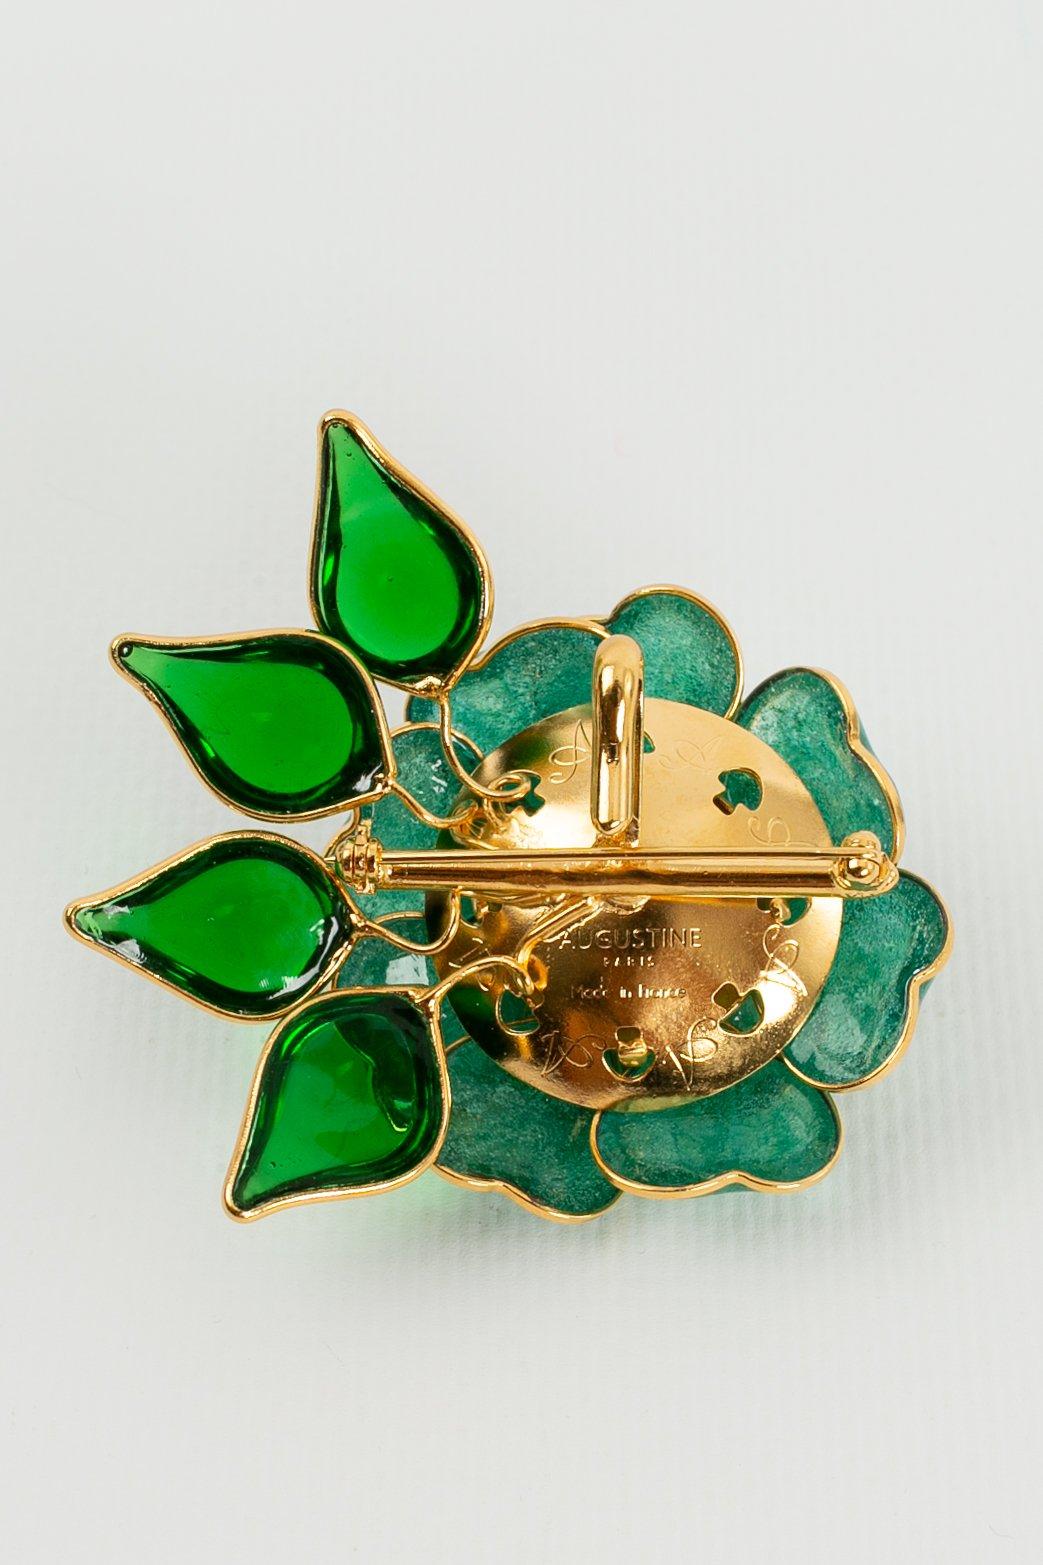 Augustine - (Made in France) Camellia brooch/pendant in gilded metal and green glass paste. Signed at the back.

Additional information:
Condition: Very good condition
Dimensions: Height: 4 cm (1.57